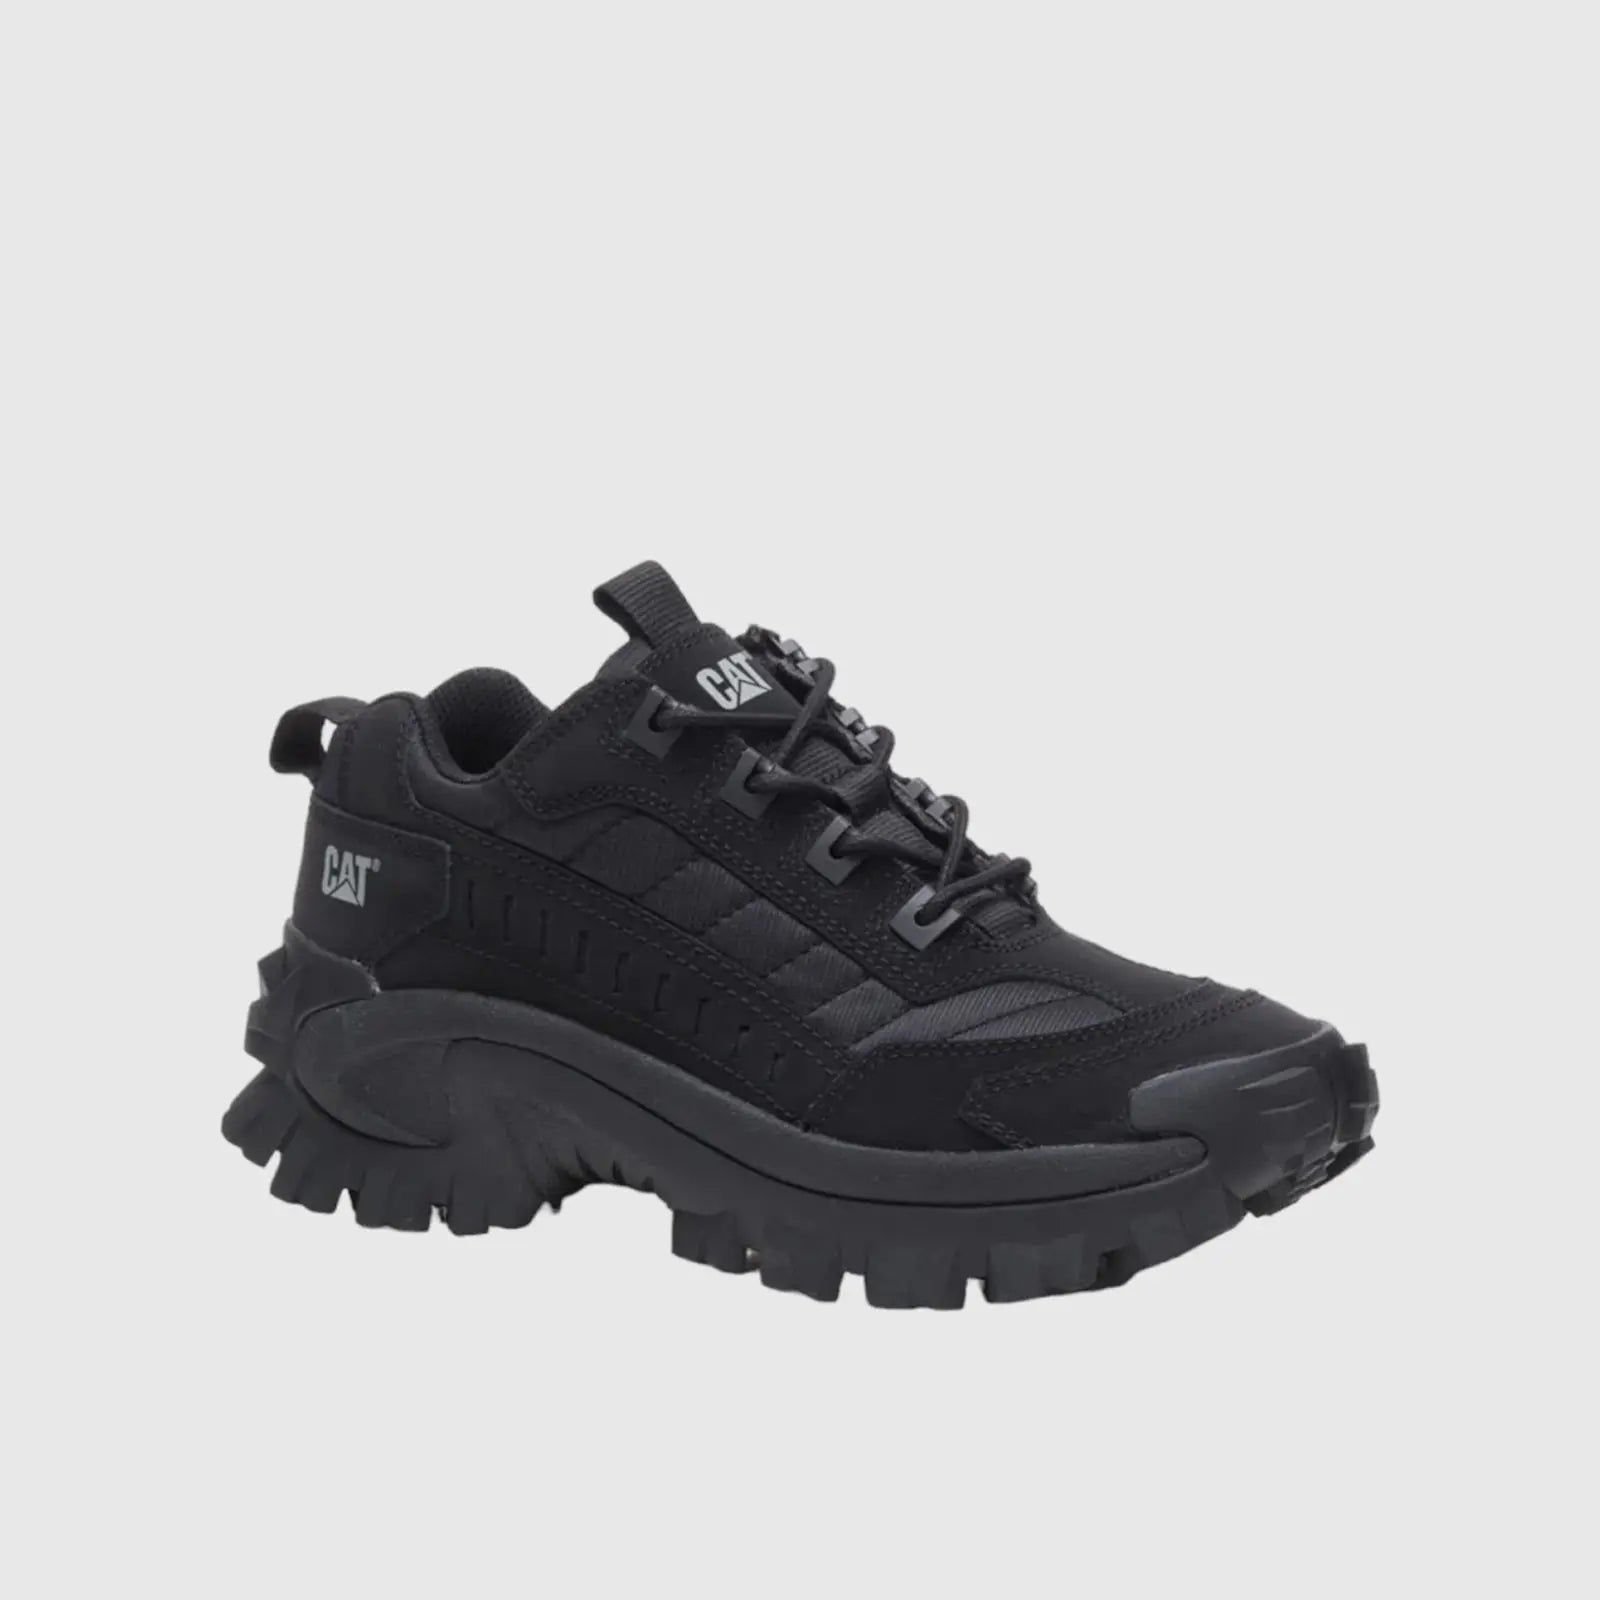 CAT INTRUDER BLACK OUT Sneakers | familyshoecentre